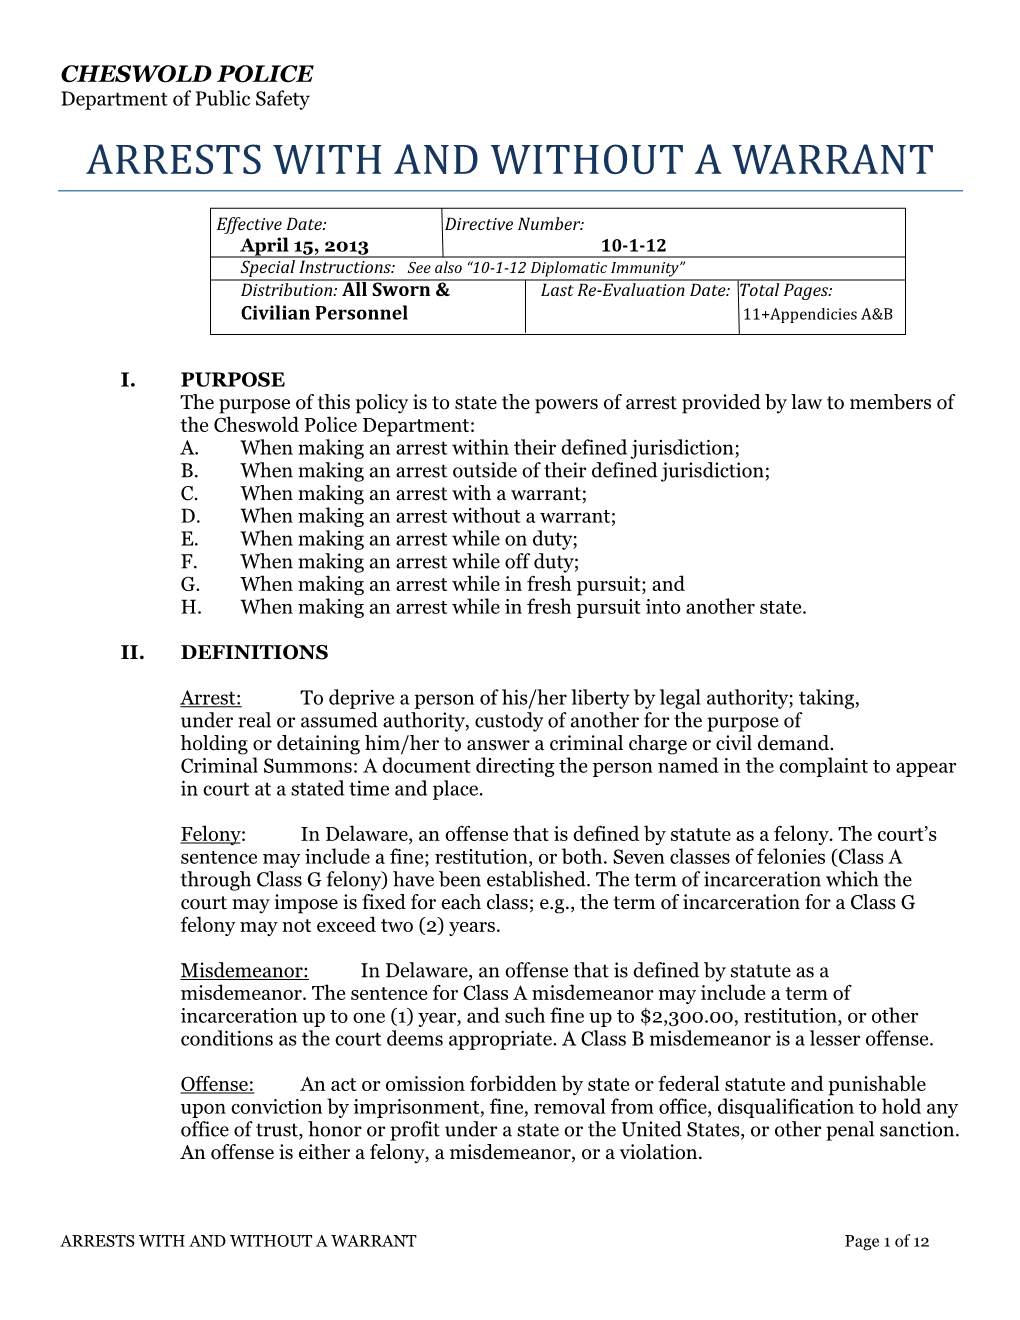 Arrests with and Without a Warrant